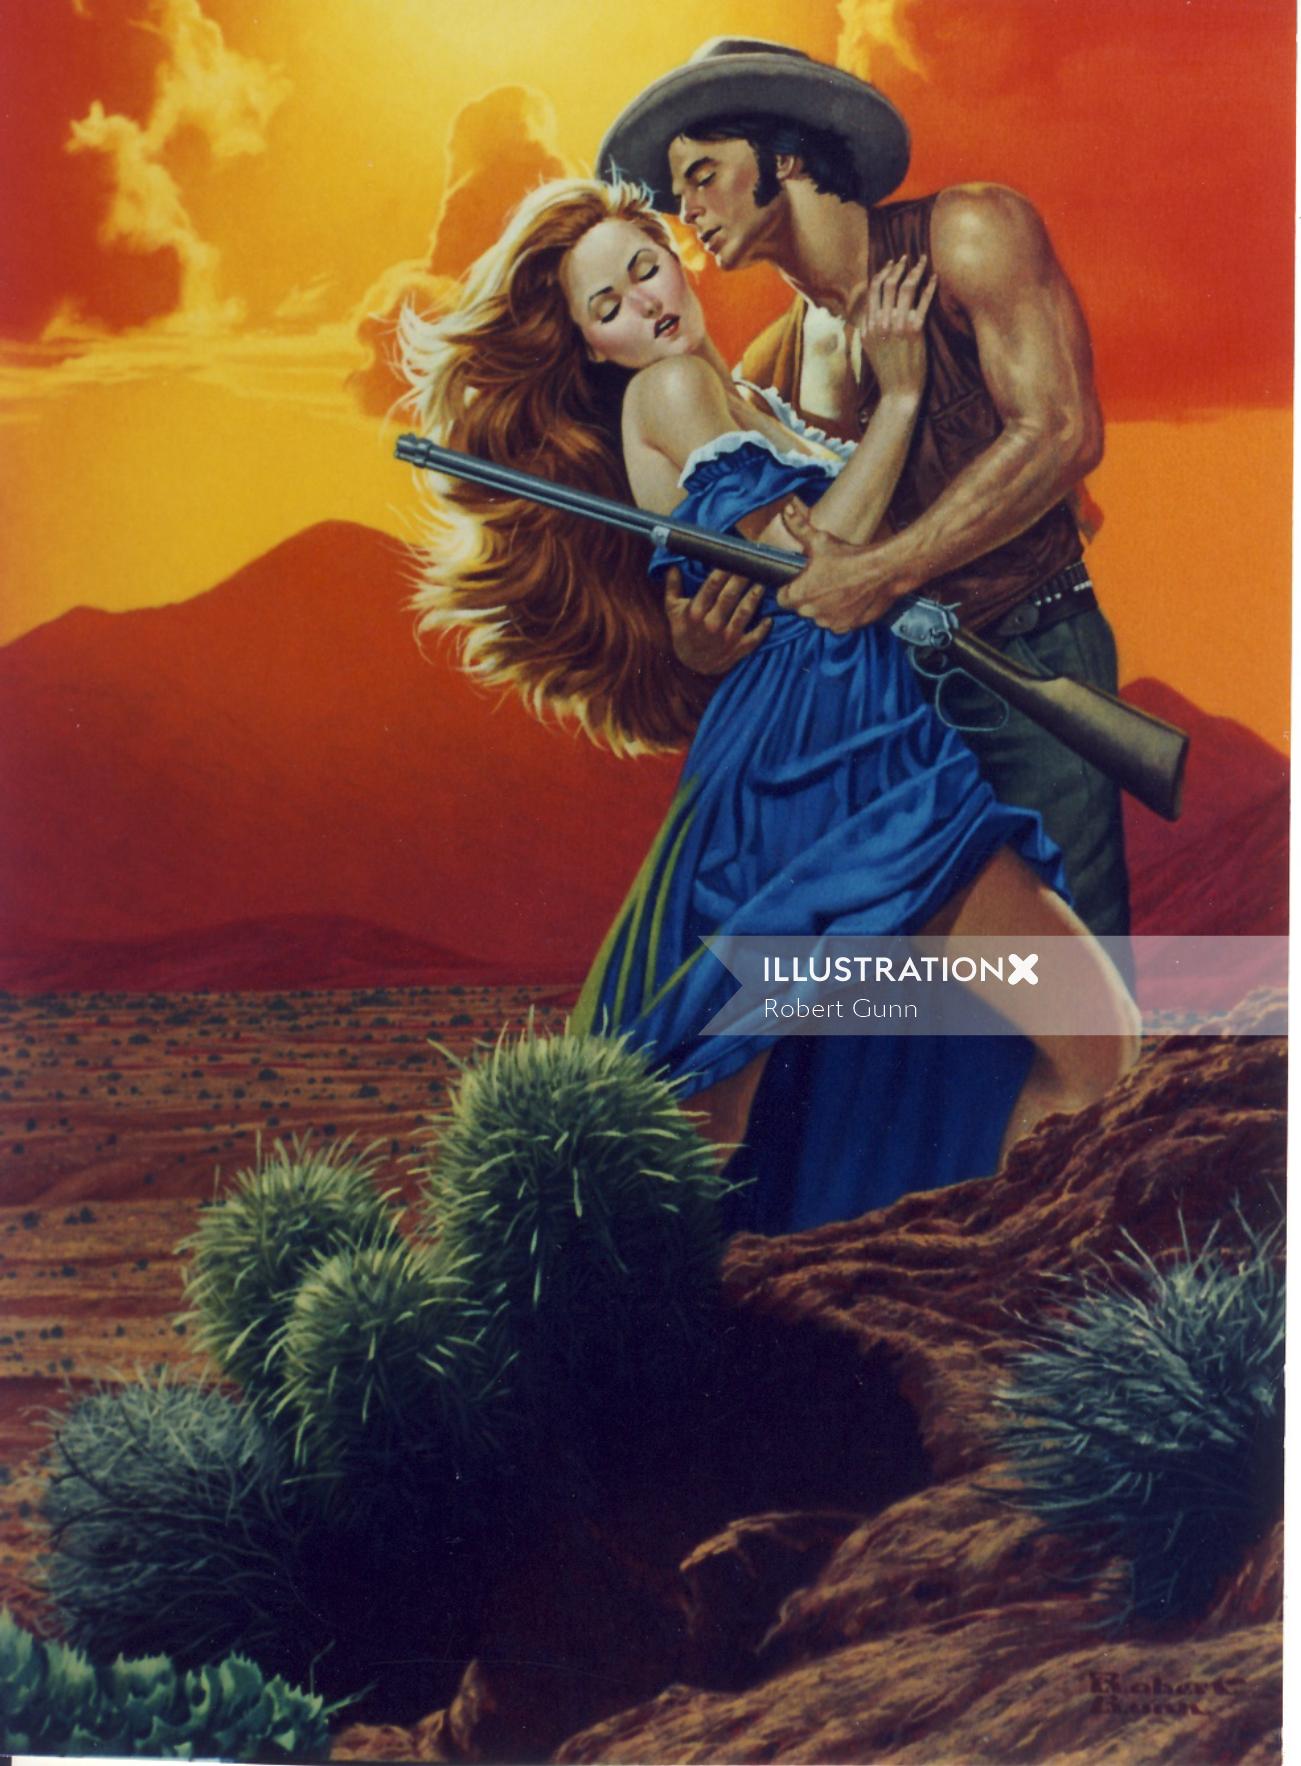 Book cover of Cowboy trying to force himself on a woman